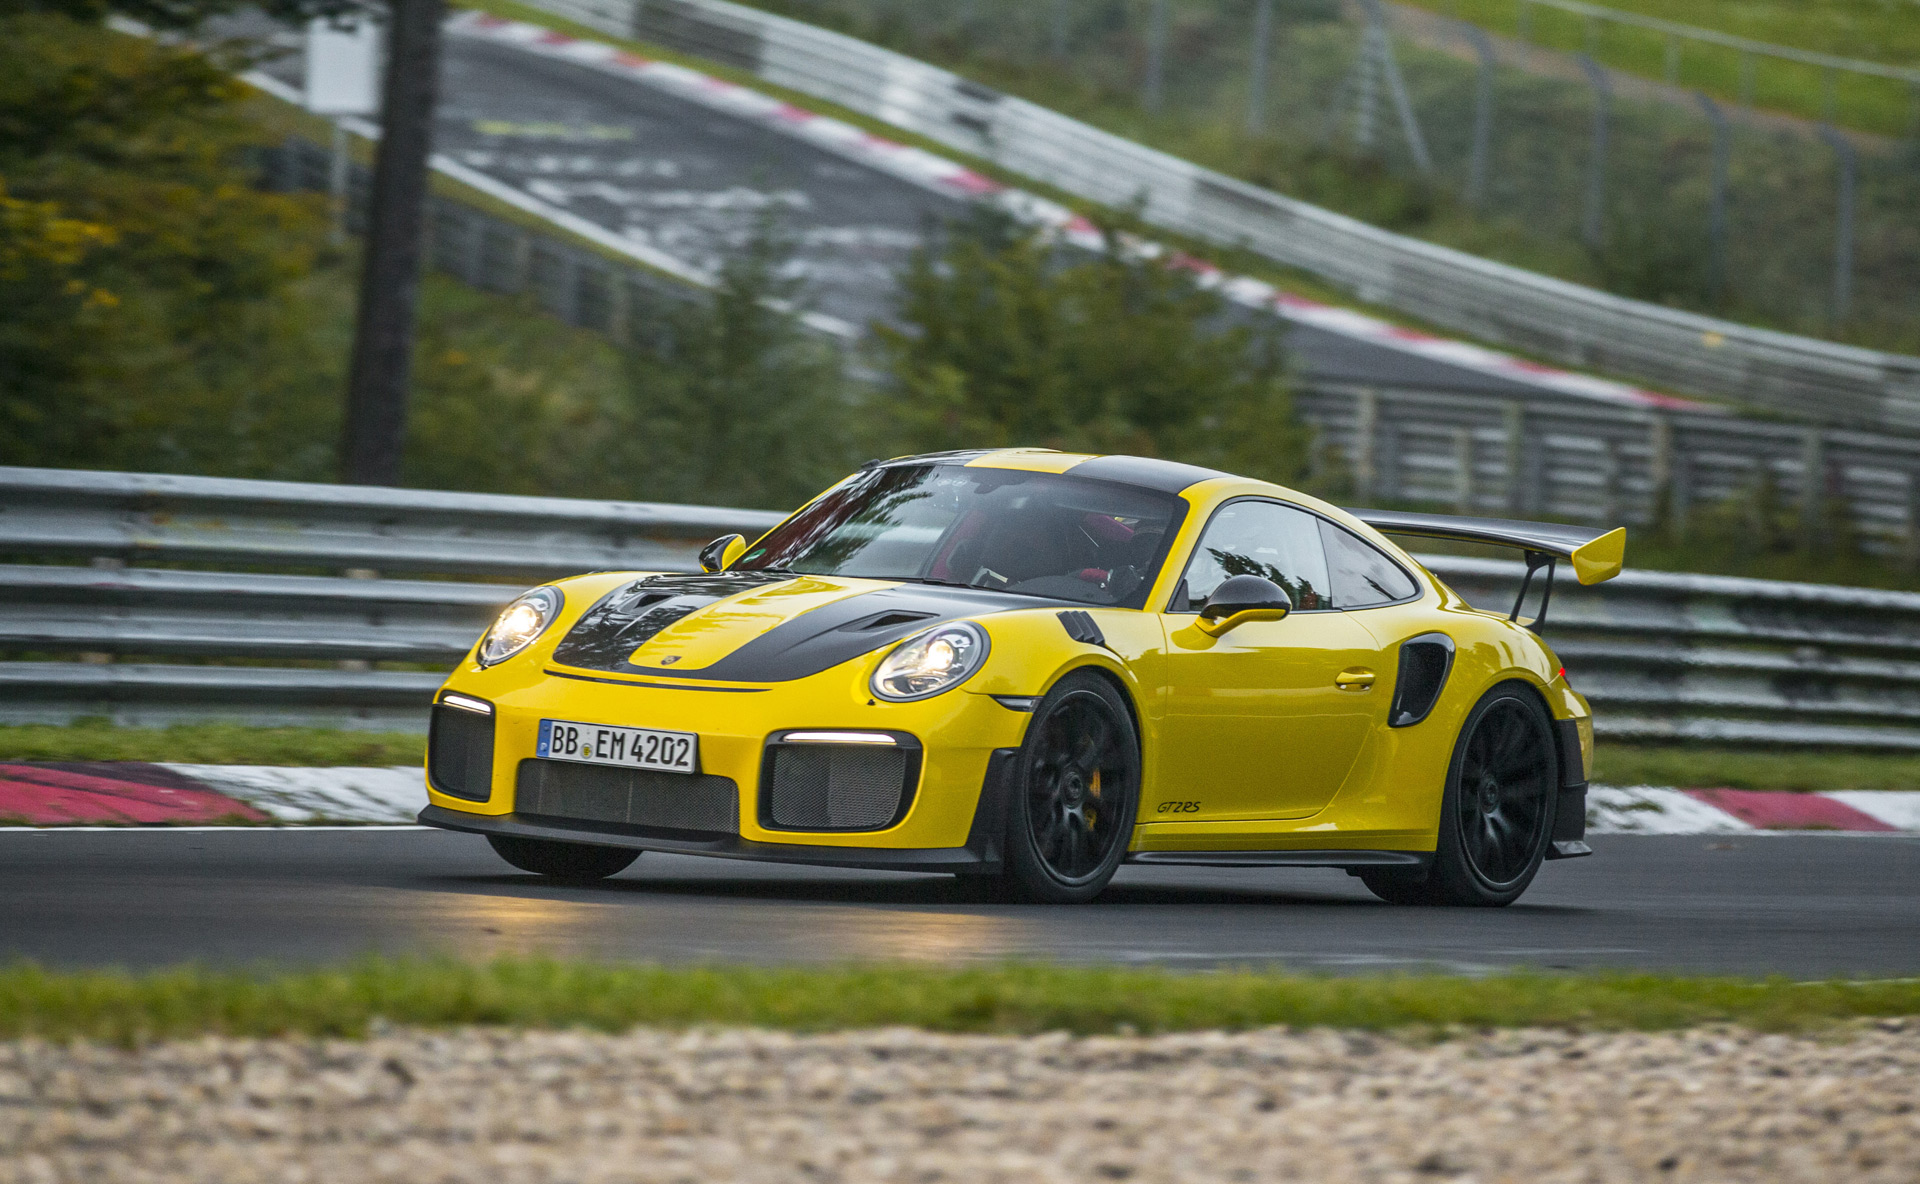 Porsche 911 Gt2 Rs Nurburgring Time , HD Wallpaper & Backgrounds